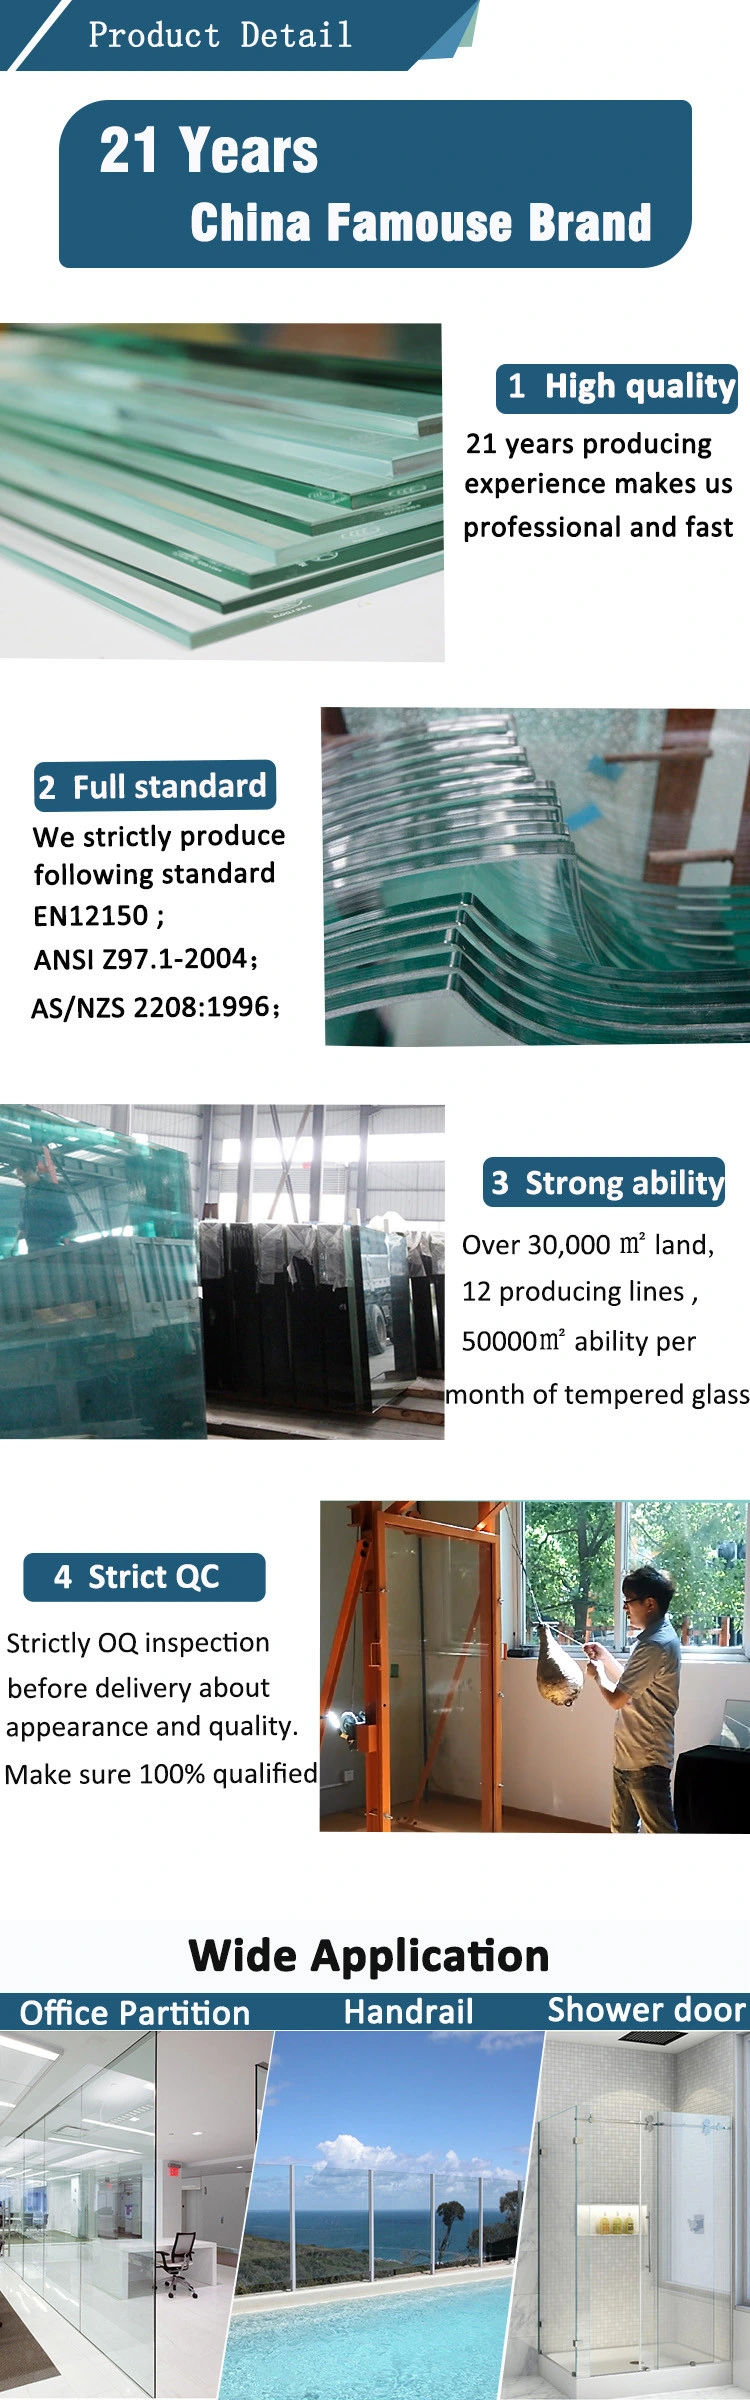 Flat/Curved Tempered/Toughened Glass for Shower Doors